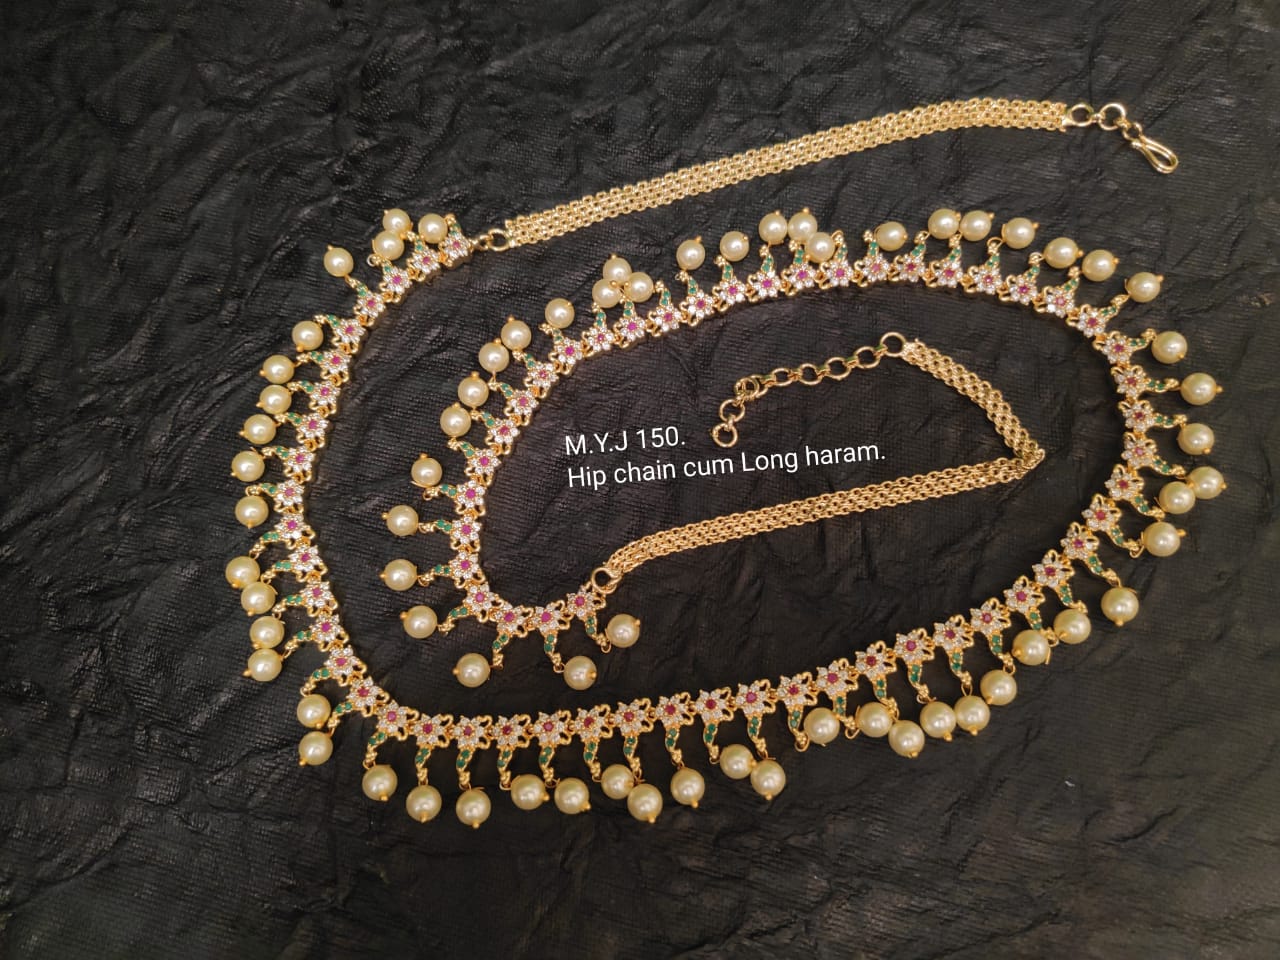 One Gram Gold Hip Chain Come Long Chain - Indian Jewelry Designs